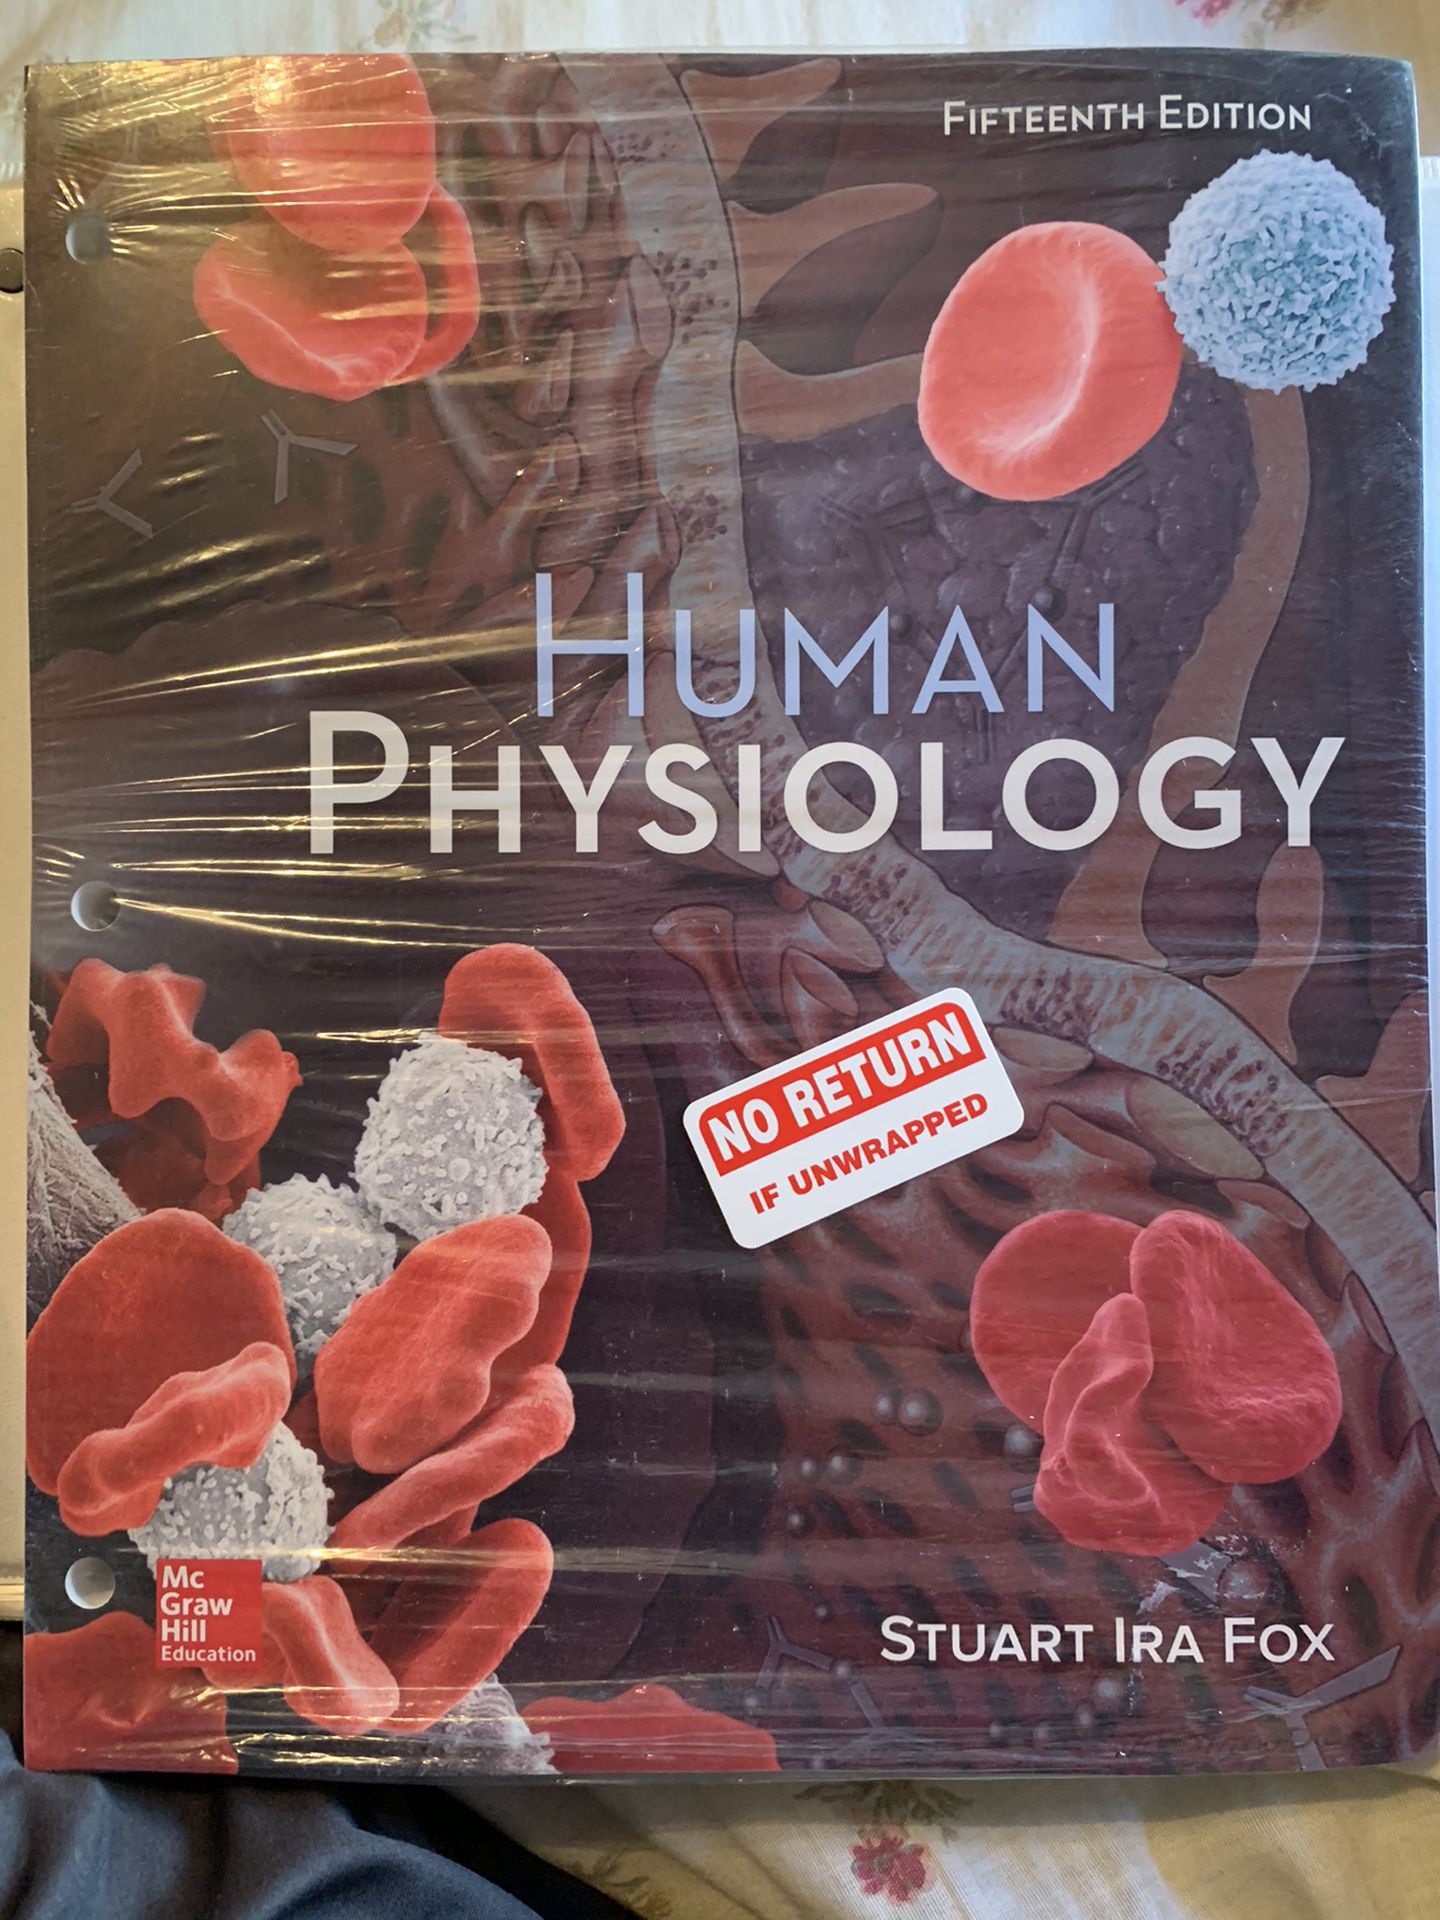 Human Physiology (15th edition)